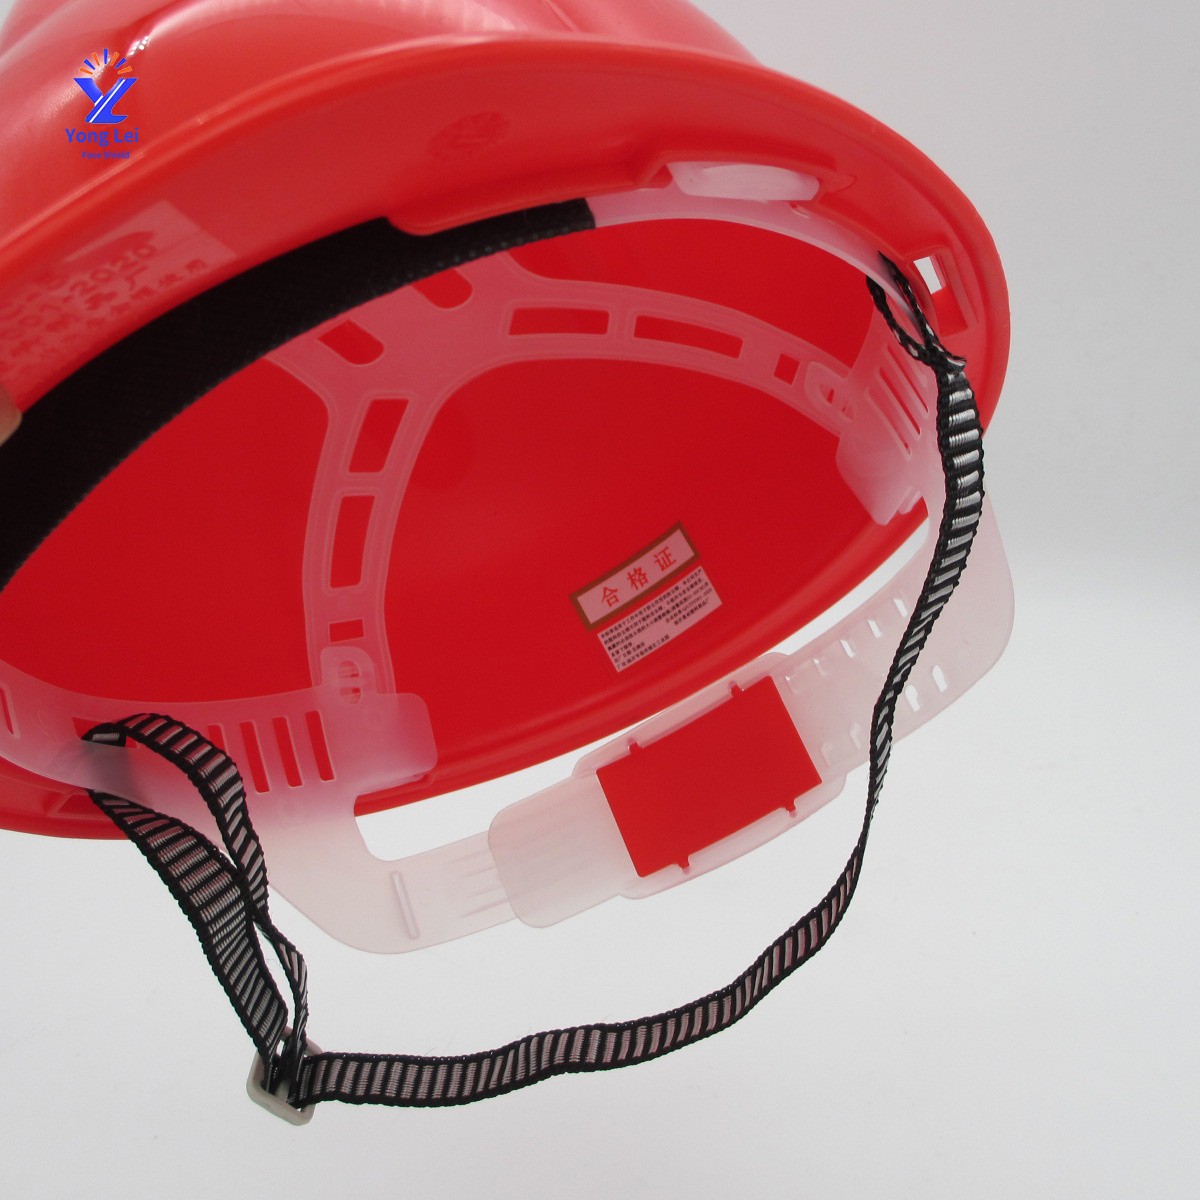 Excellent Impact Resistance Hard Hat Protective Construction Industrial Safety Helmet